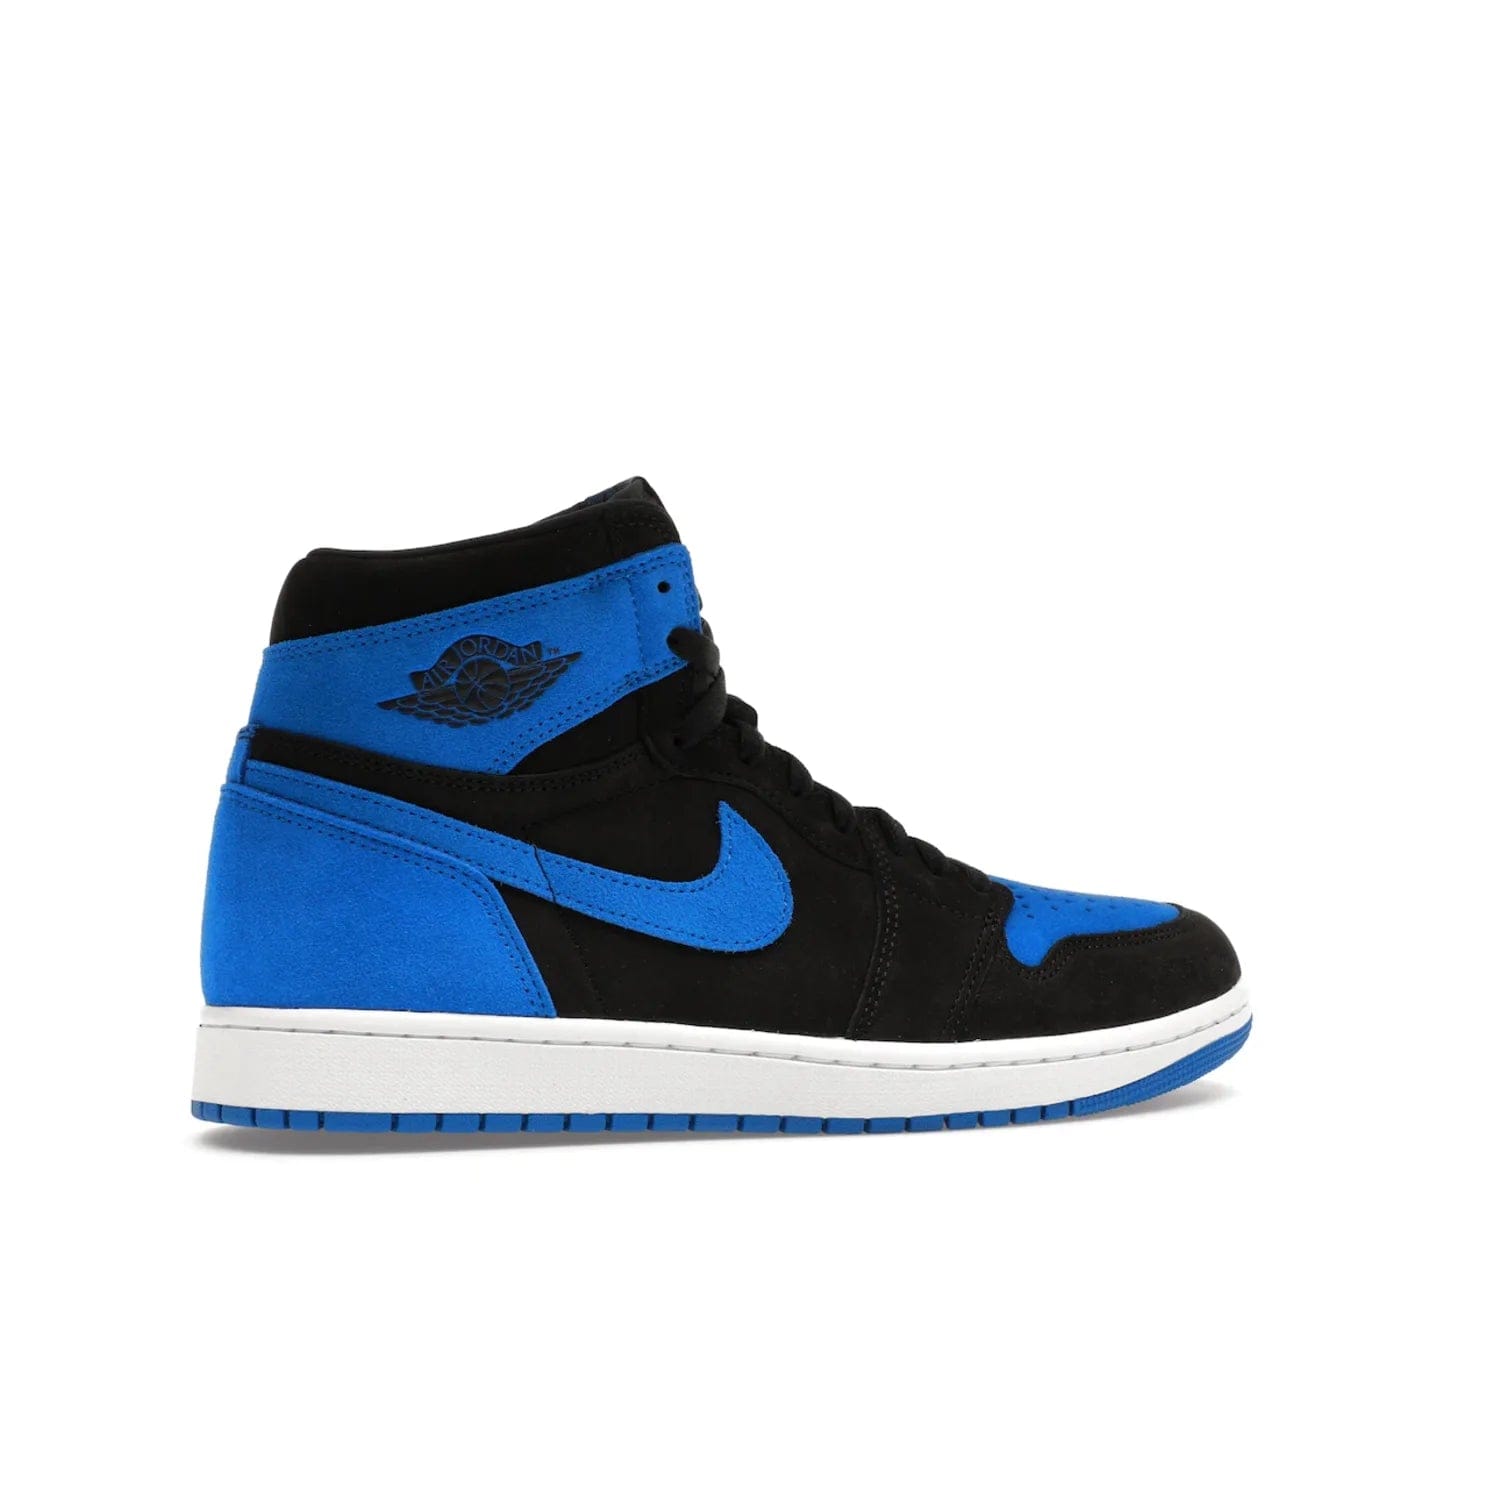 Jordan 1 Retro High OG Royal Reimagined - Image 35 - Only at www.BallersClubKickz.com - ####
Old meets the new: Jordan 1 Retro High OG 'Royal Reimagined' is a bold statement of evolution with its royal blue and black suede material makeup. Swoosh overlays, Wings logos, padded ankle collars and Nike Air tags maintain the OG's legendary lineage. Get a pair on November 4th and be part of a fearless, unyielding story.